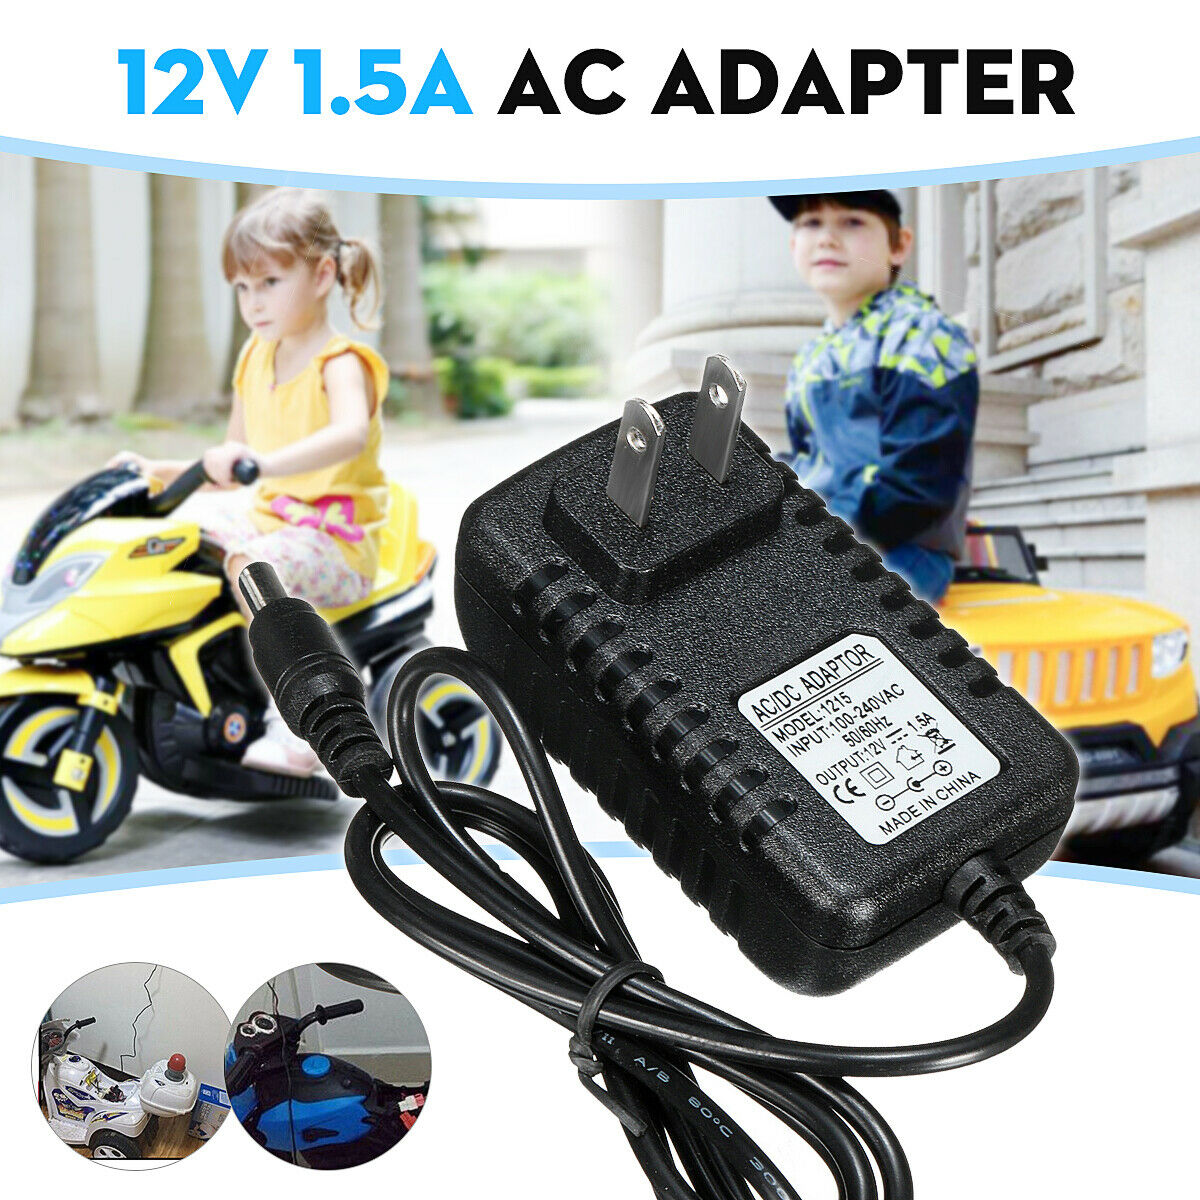 *Brand NEW*12V 1A Battery Charger Adapter For Kids ATV Quad Ride On Cars Motorcycle